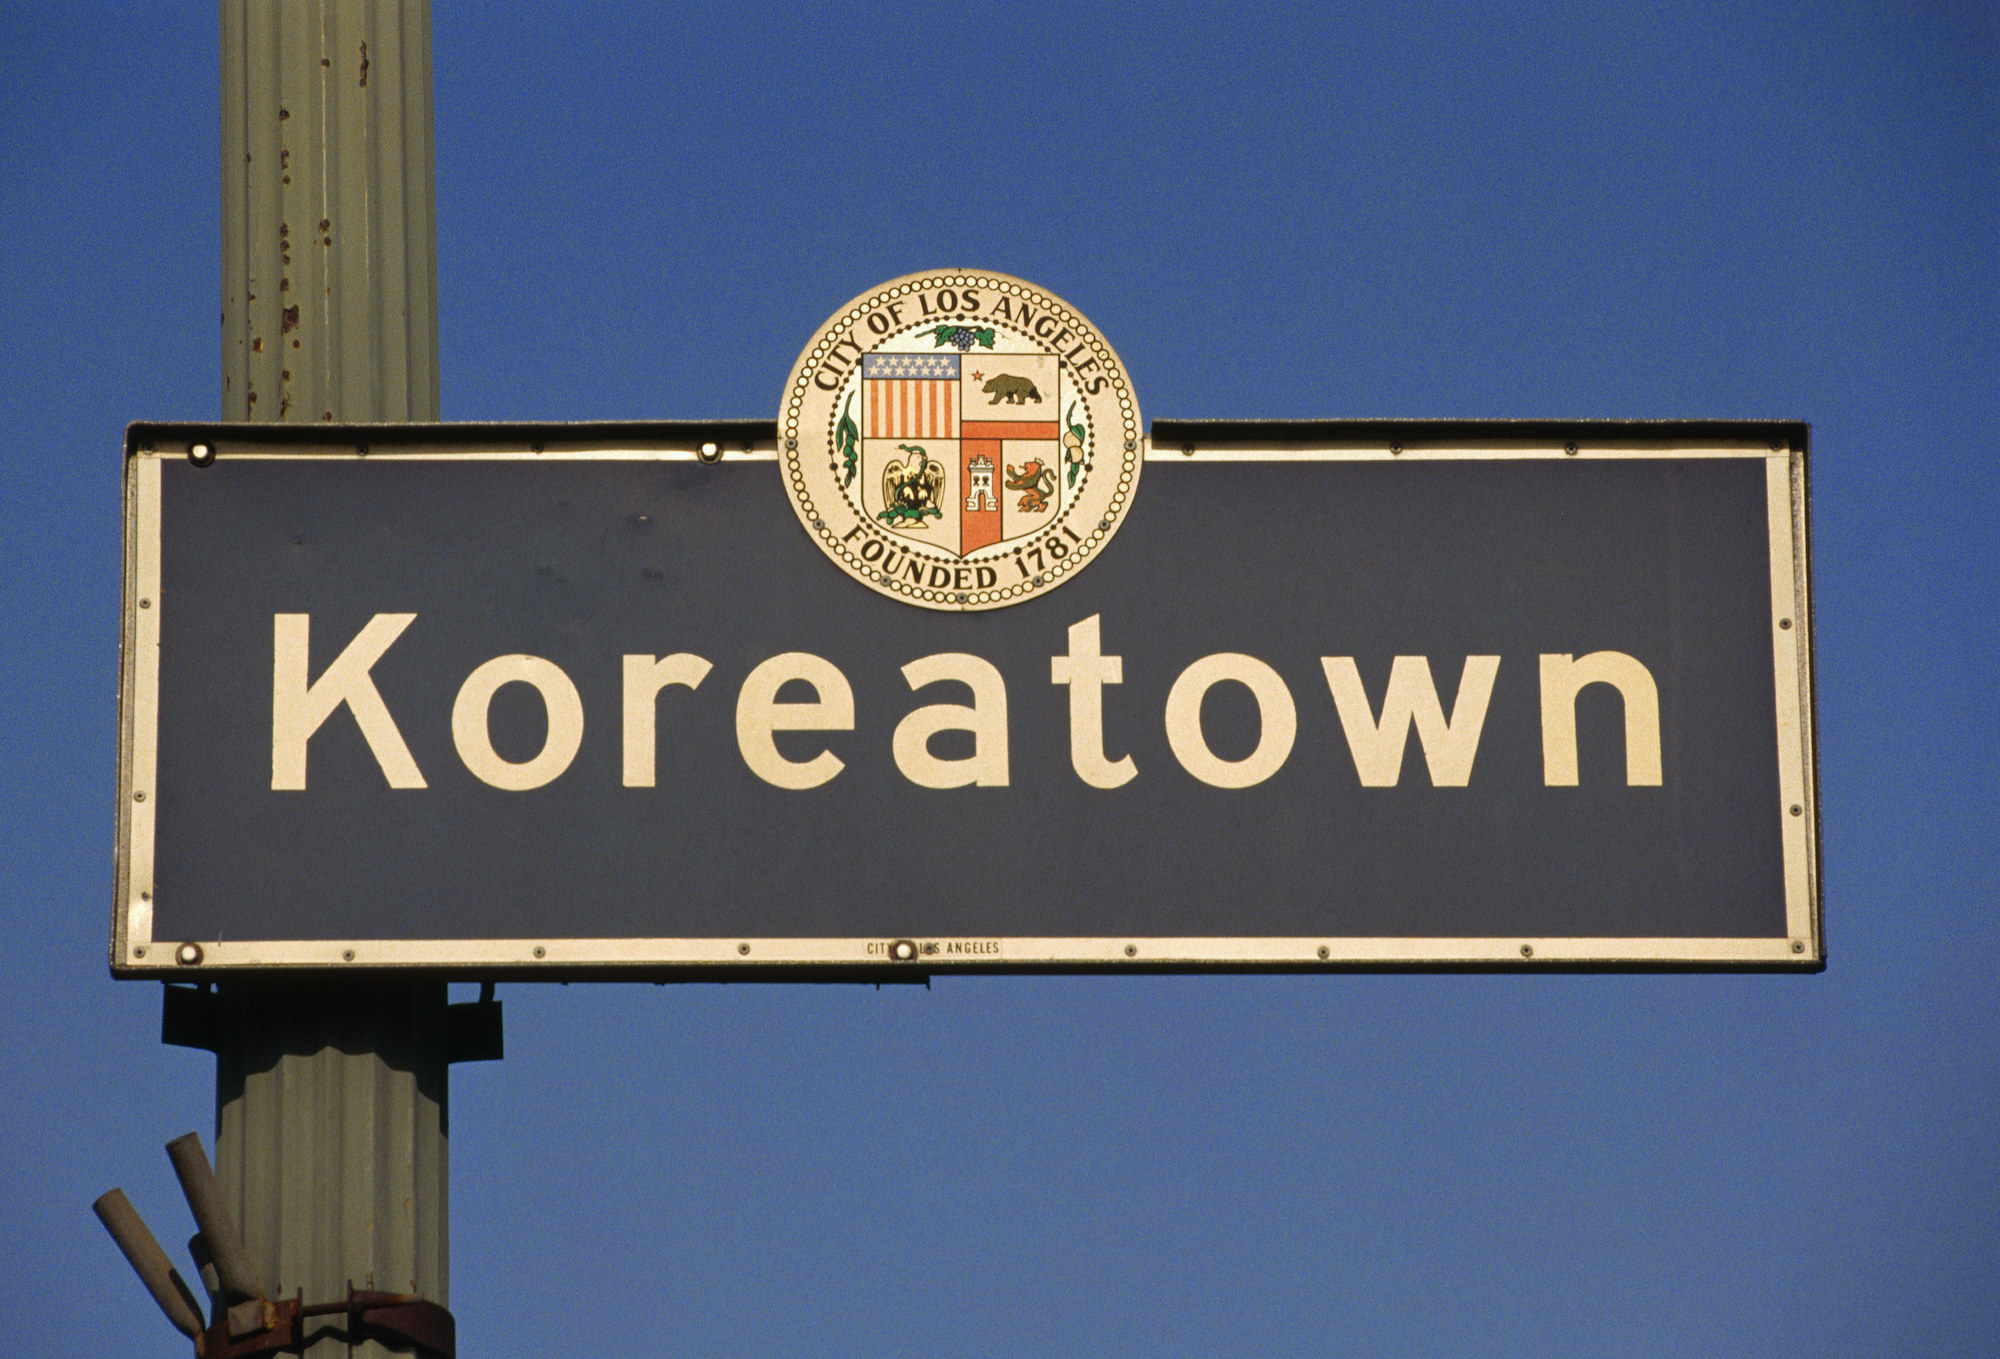 A Koreatown sign